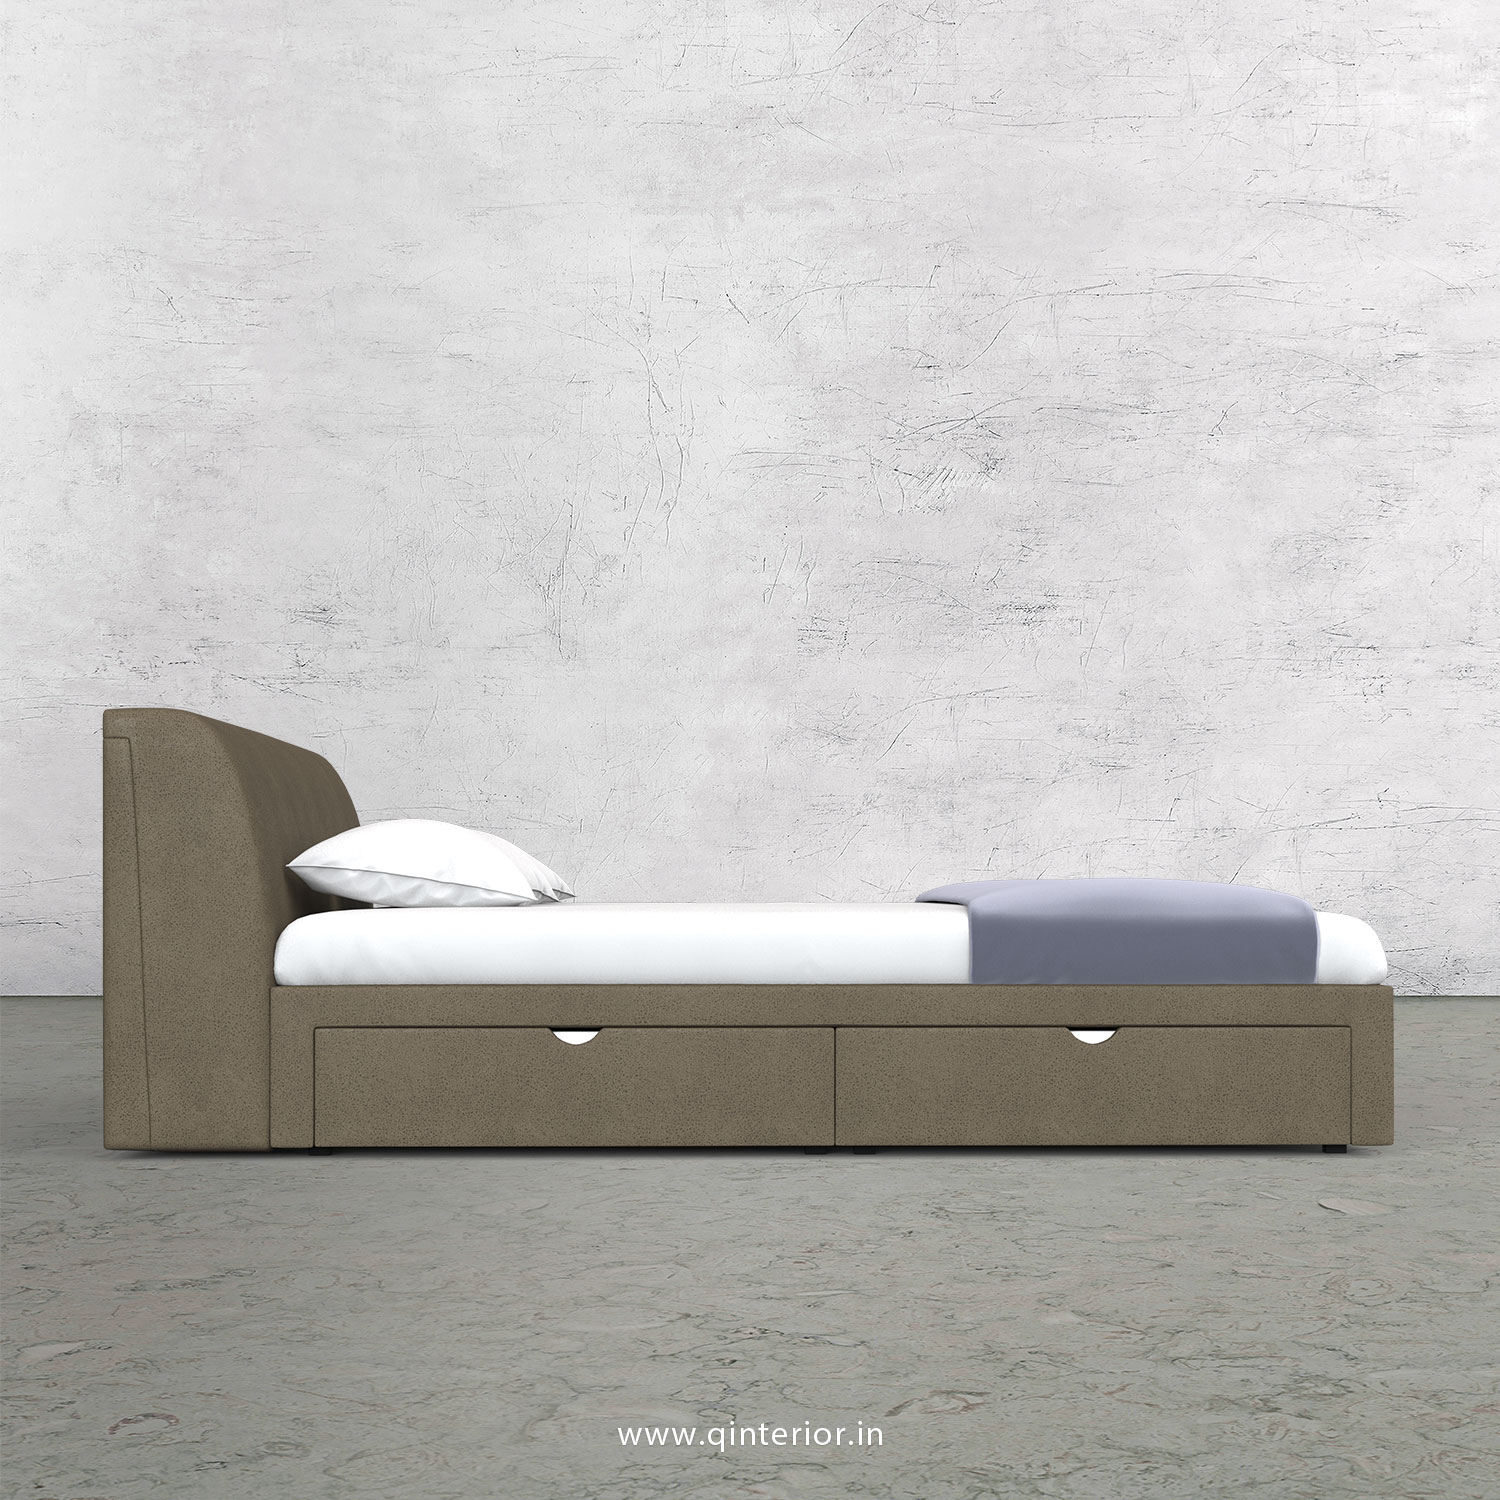 Luxura Queen Storage Bed in Fab Leather Fabric - QBD007 FL06